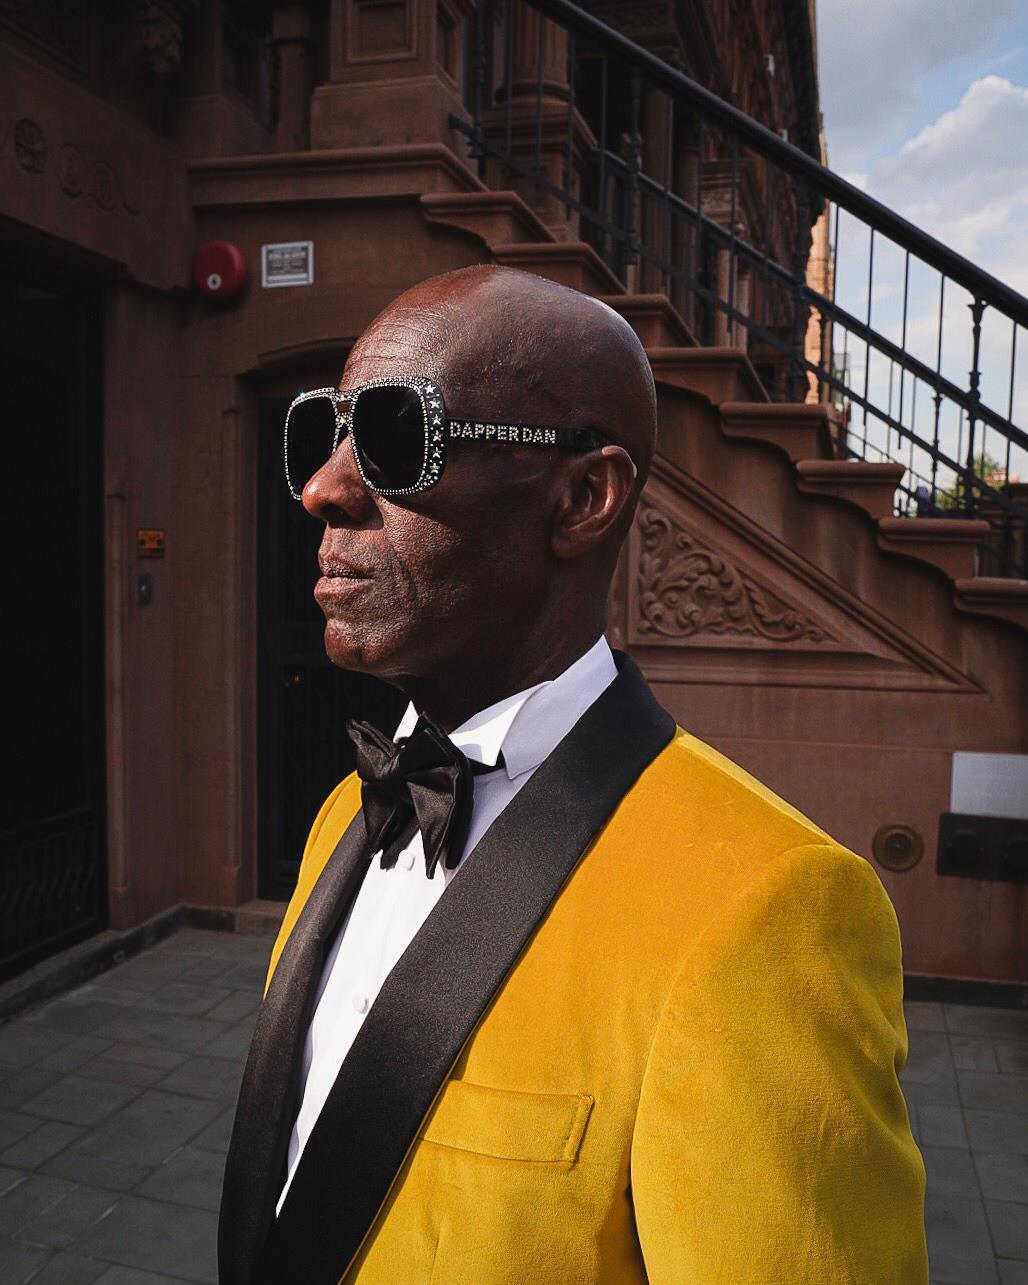 Gucci-Dapper Dan: a special collaboration between the House and